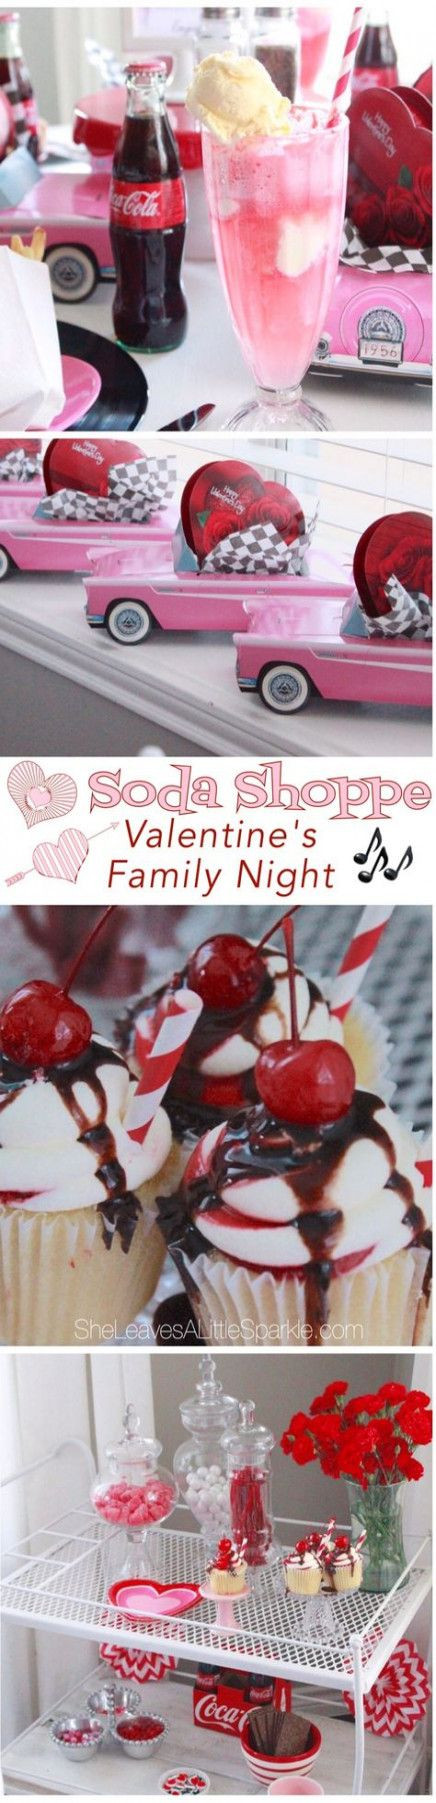 Valentine'S Dinner Ideas For Family
 Desserts Easy For Kids Families Valentines Day 38 Ideas